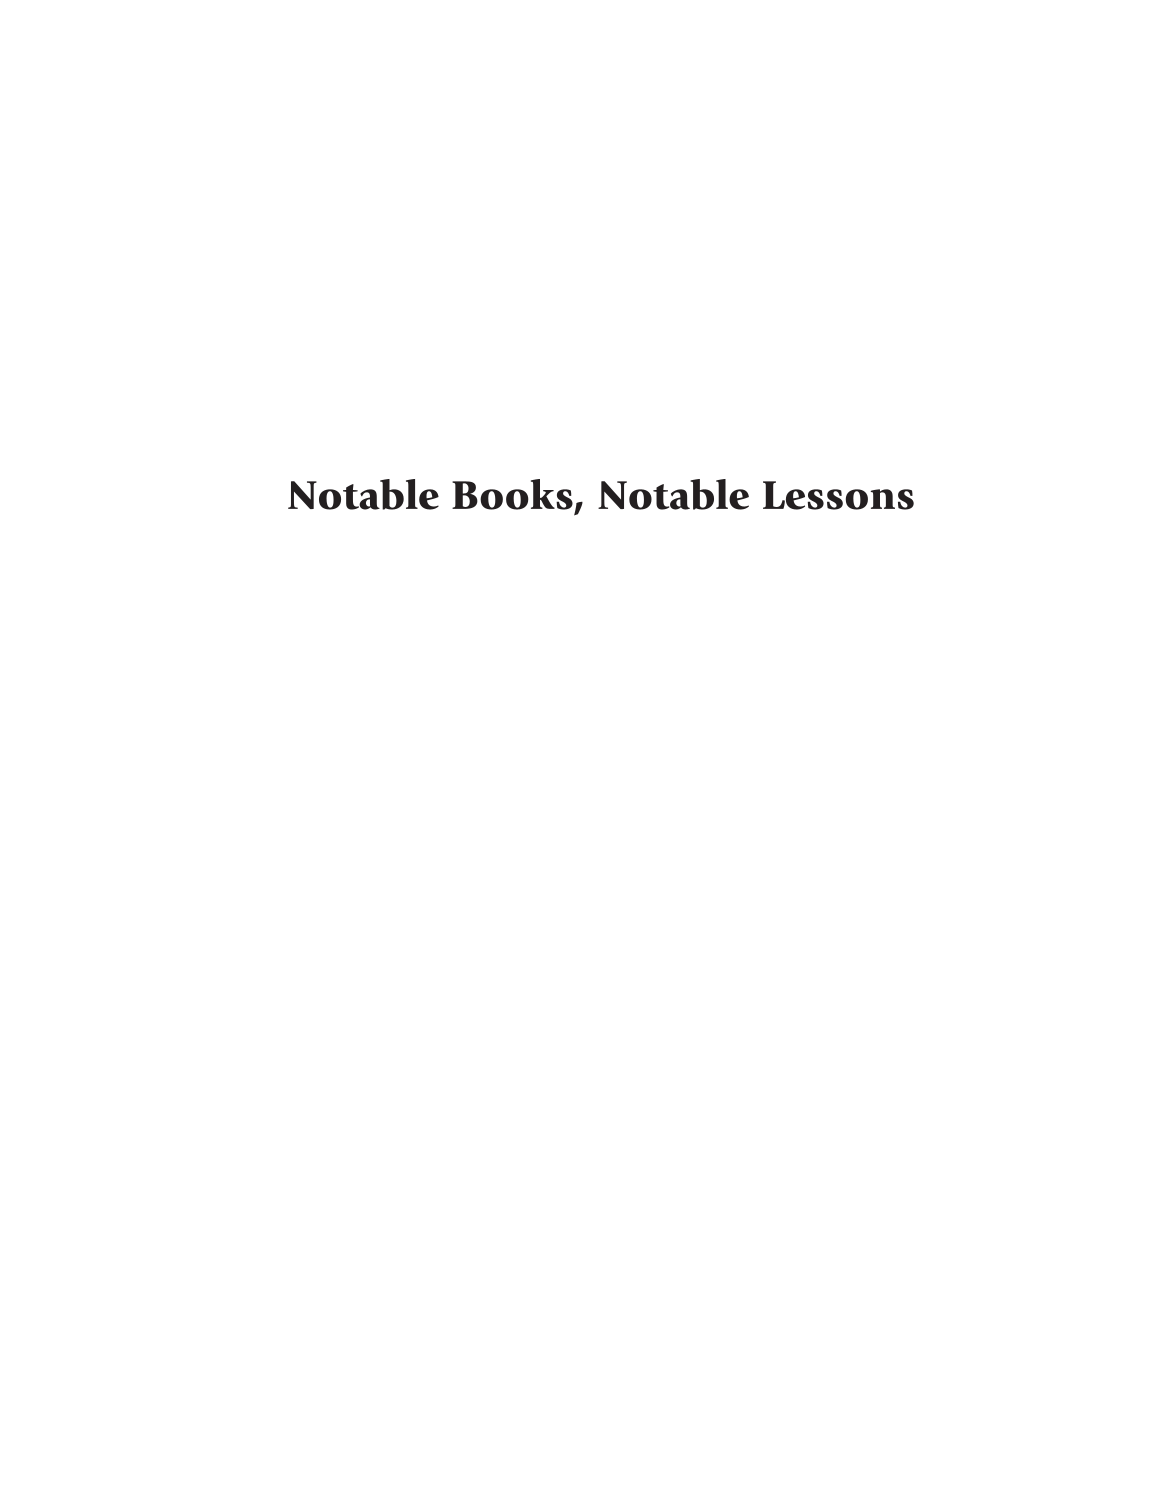 Notable Books, Notable Lessons: Putting Social Studies Back in the K-8 Curriculum page i